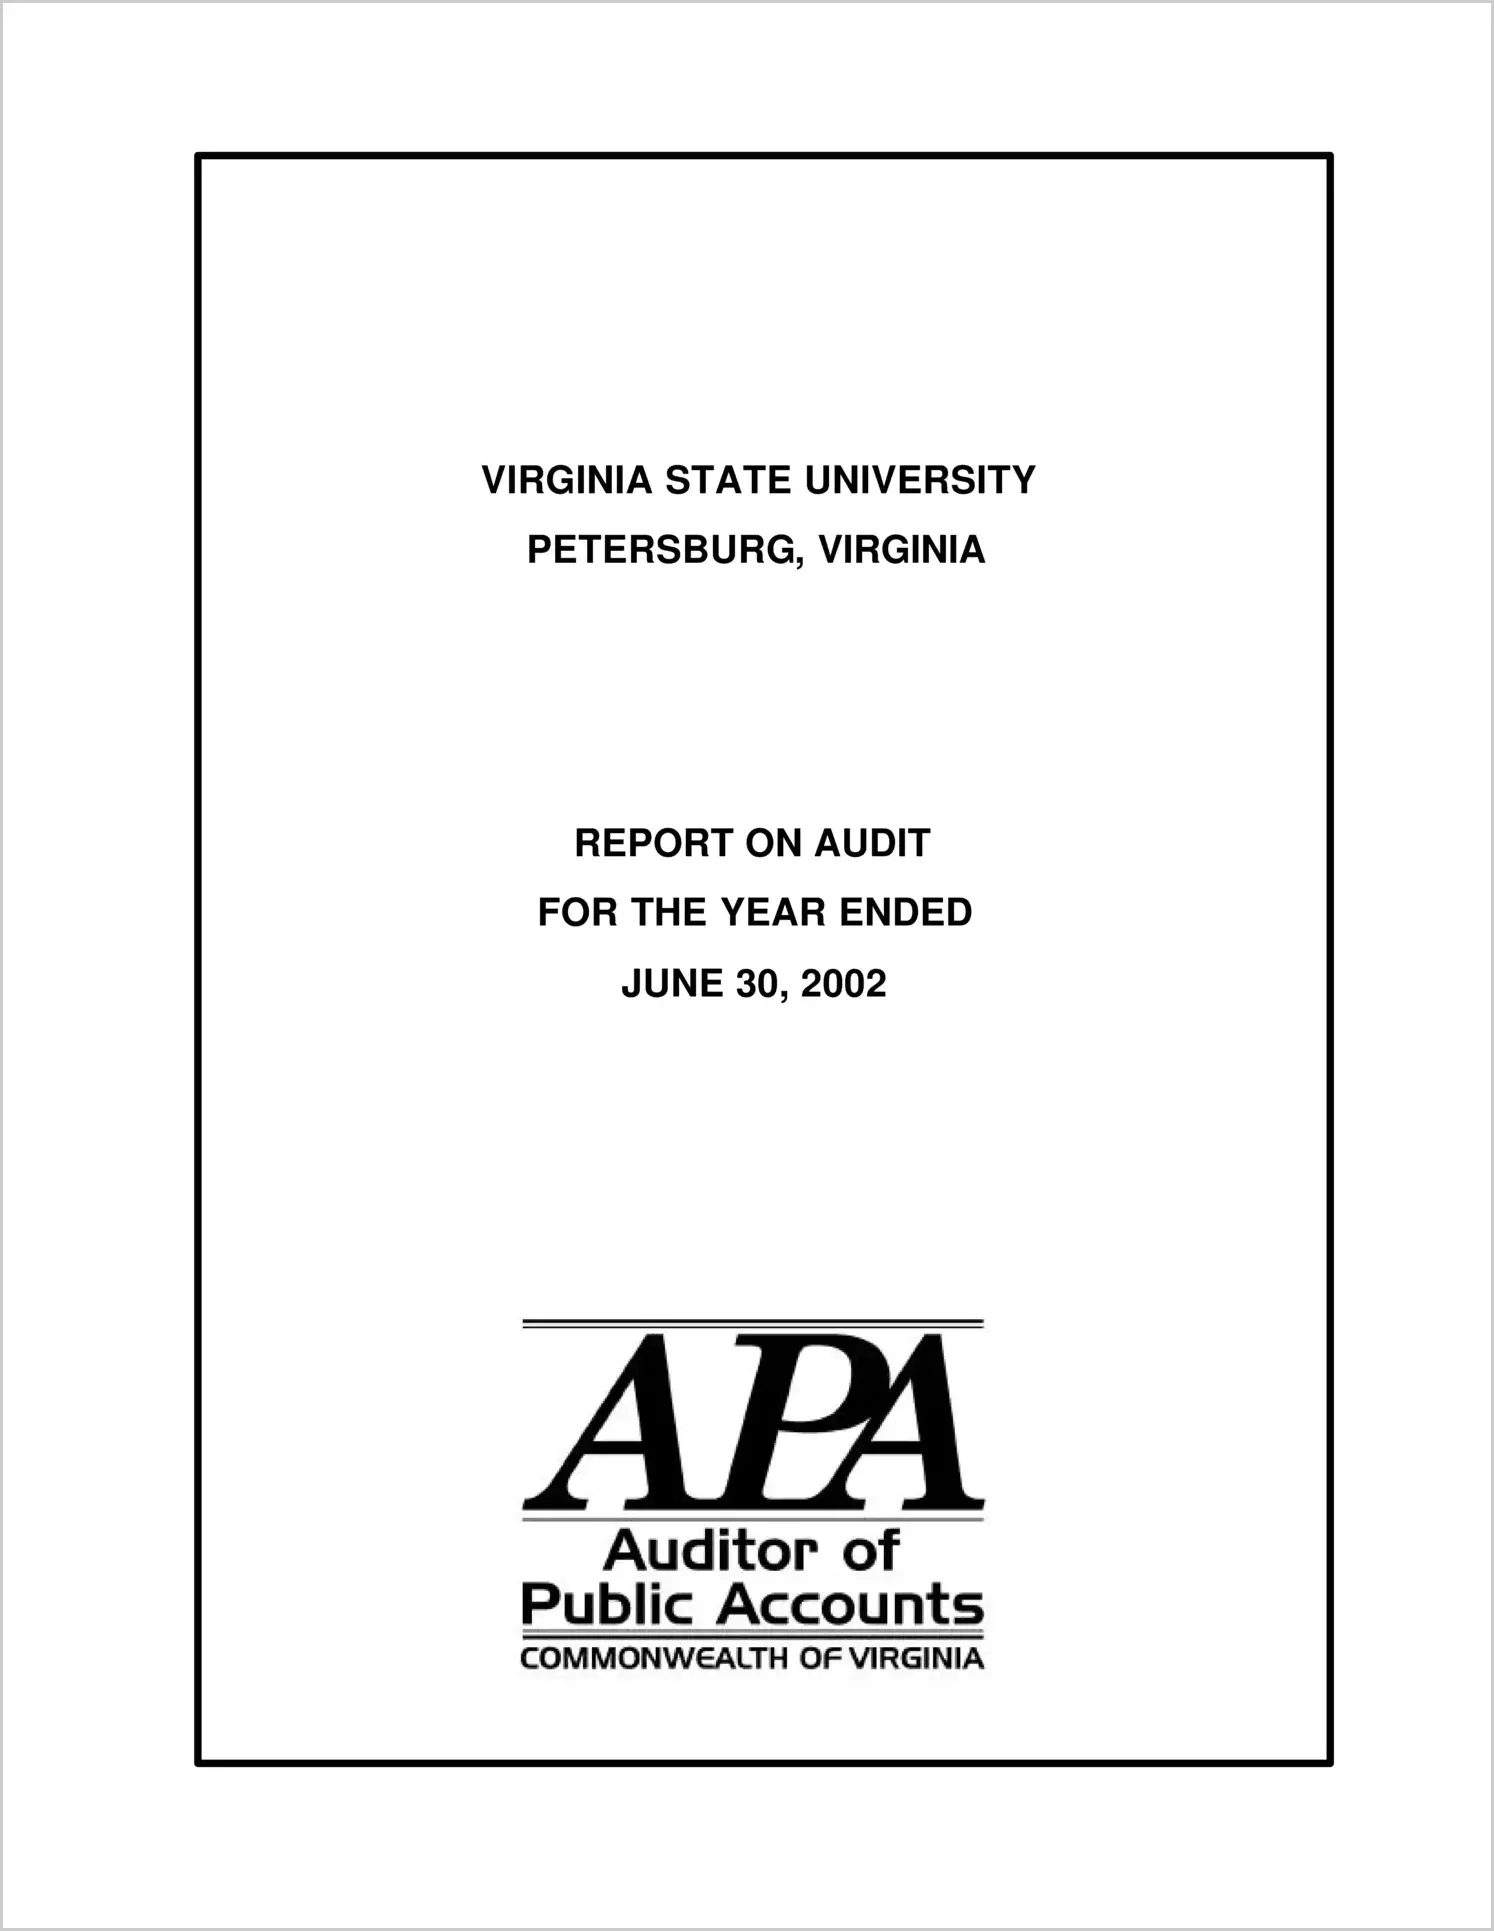 Virginia State University for the year ended June 30, 2002